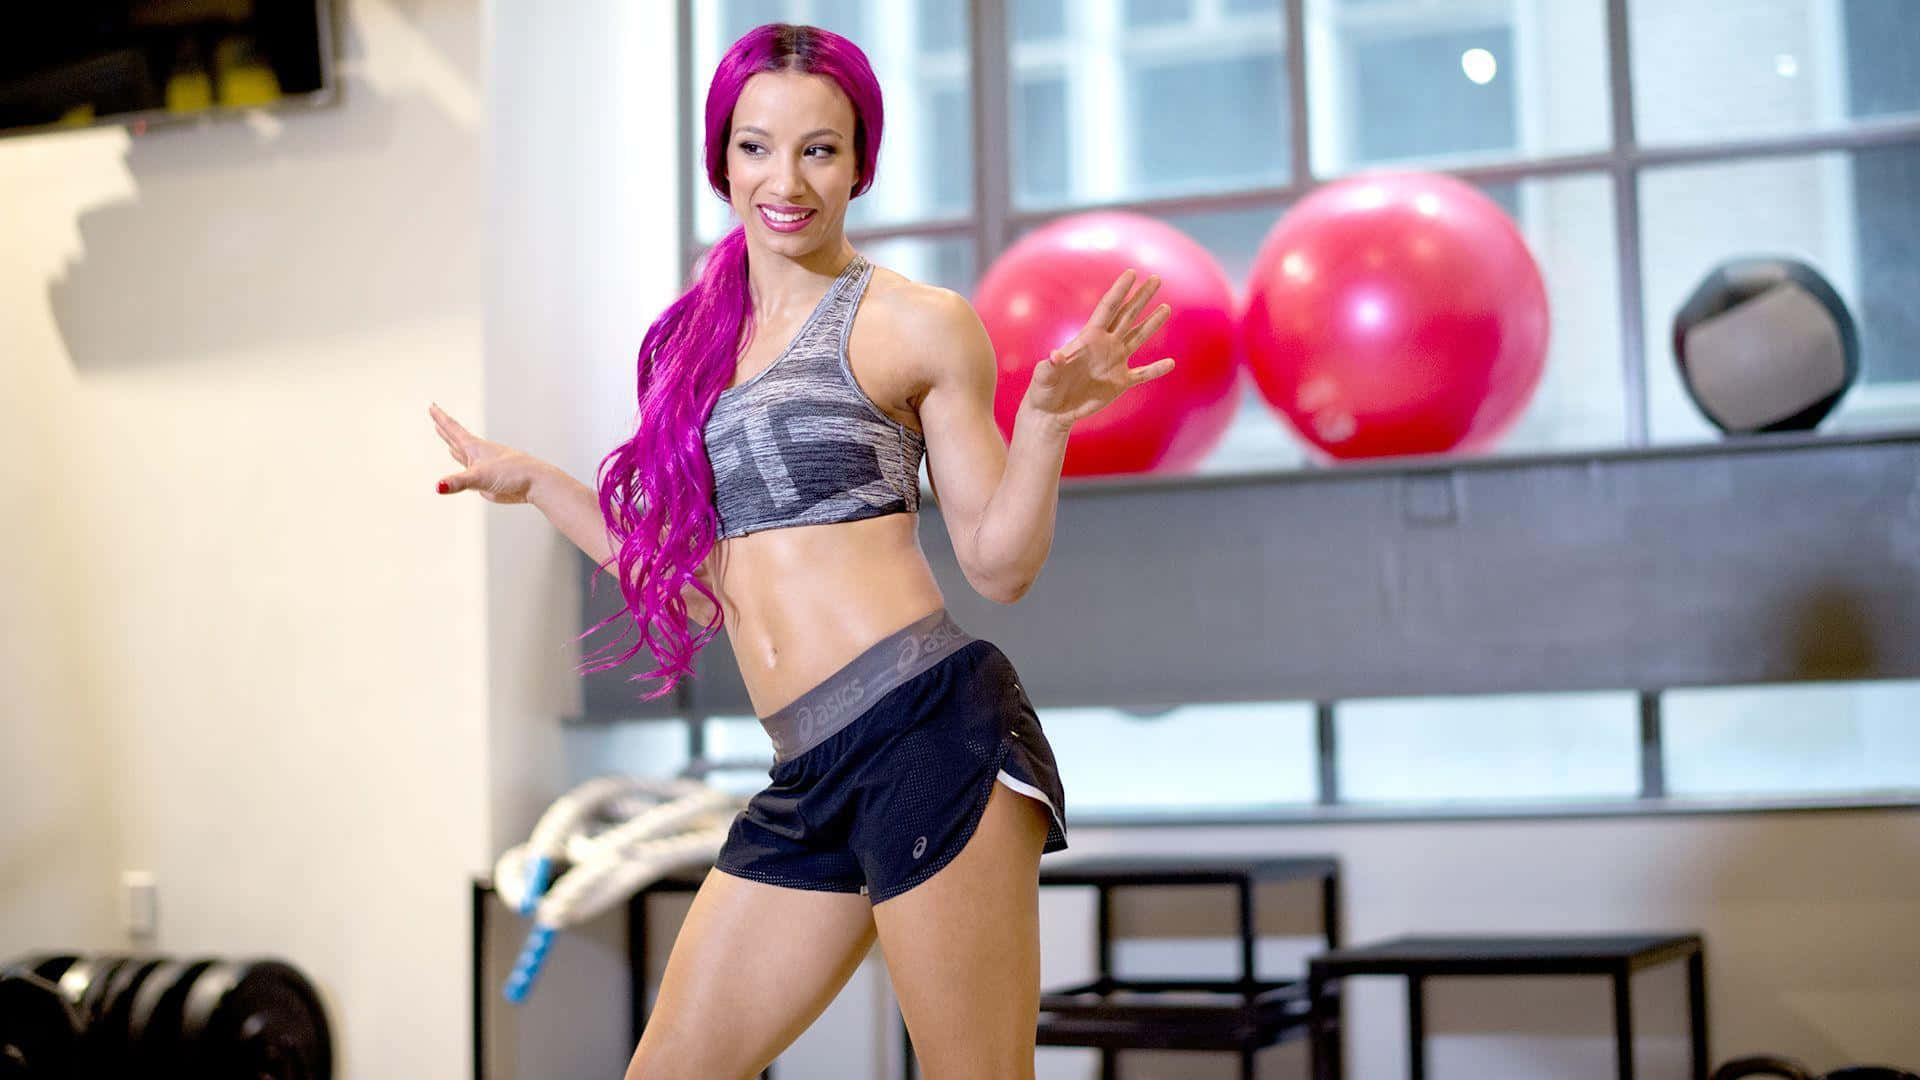 A Woman With Purple Hair Standing In A Gym Wallpaper